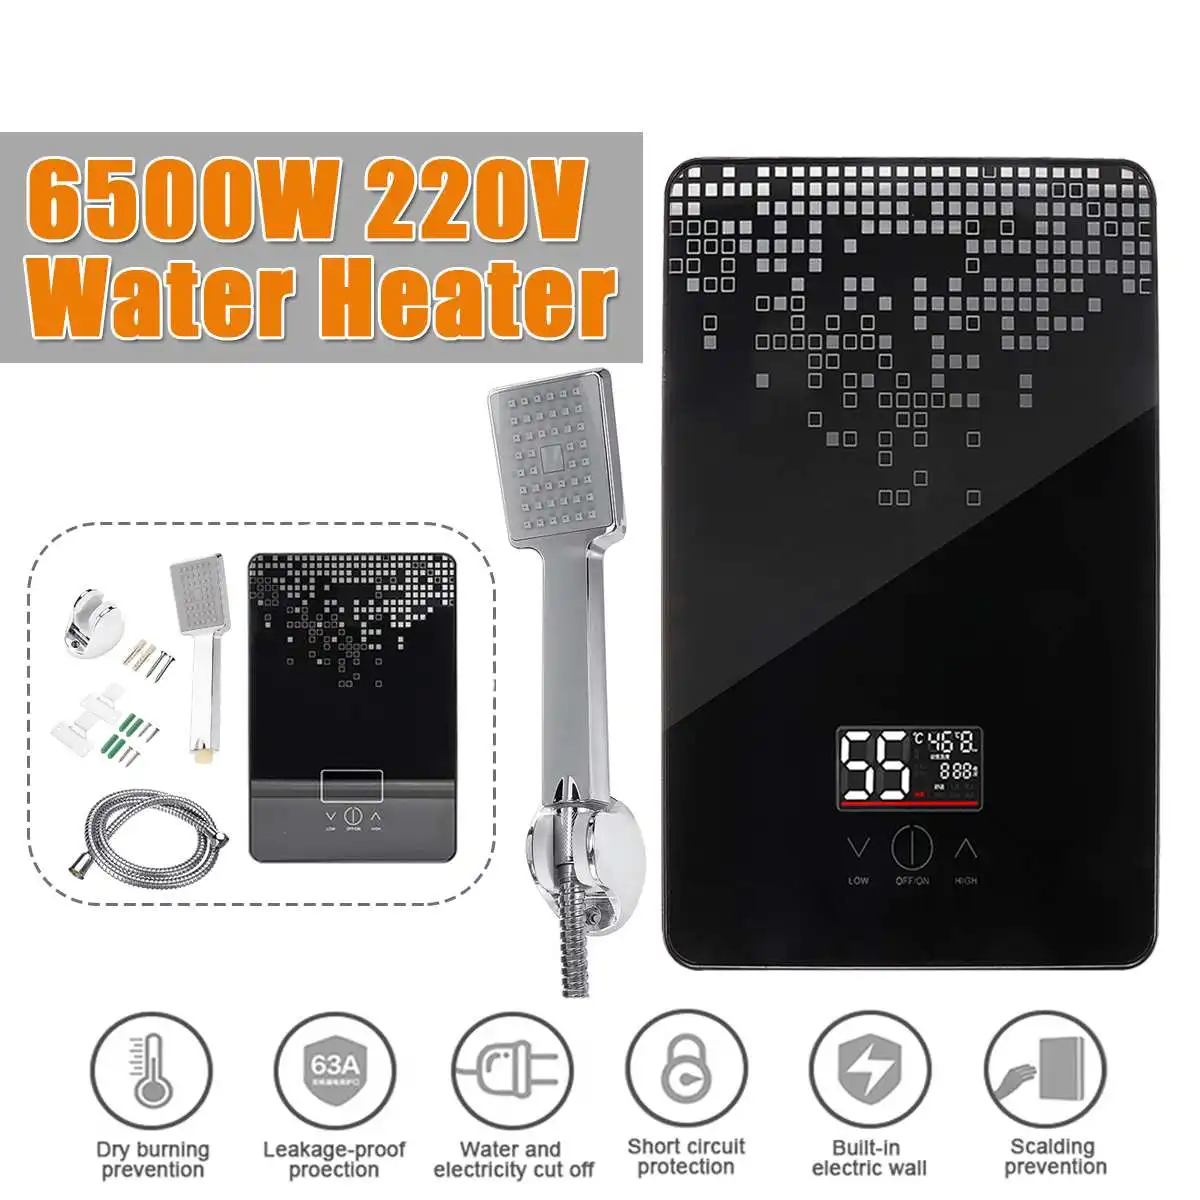 220V 6500W Electric Water Heater Multi-purpose Household Hot-Water Heater Instant Tankless Bathroom Shower Water Heater